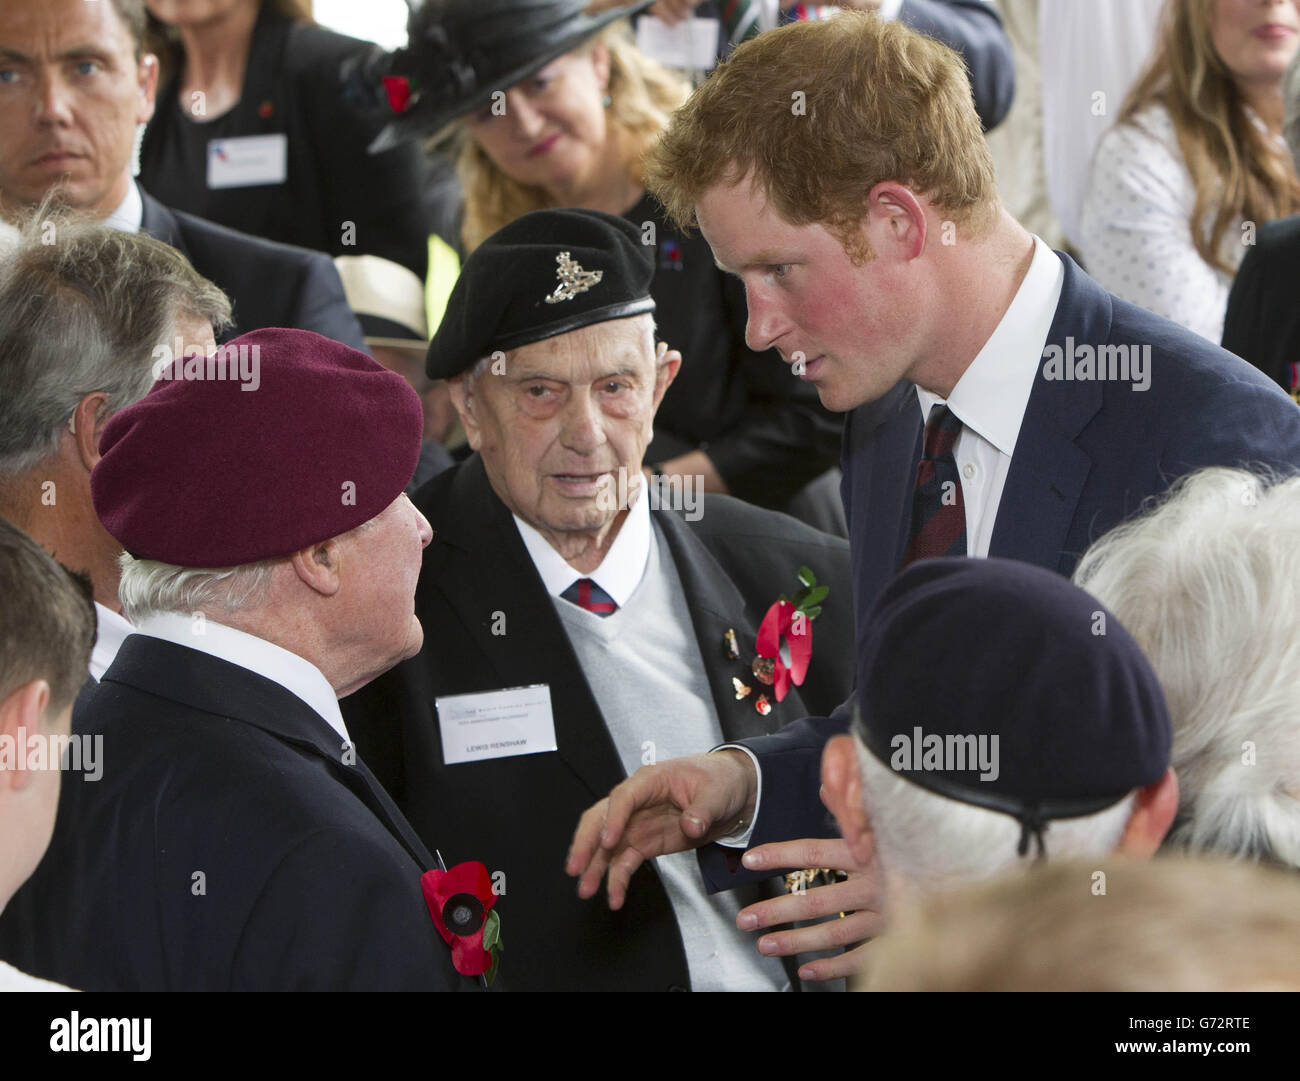 Prince Harry attends the British commemoration reception at the Hotel Rocca in Cassino and speaks with WWII veterans; the event commemorates the 70th Anniversary of the Battles of Monte Cassino, acknowledging the British and Commonwealth contribution to the successful conclusion of the battles in this area. Stock Photo